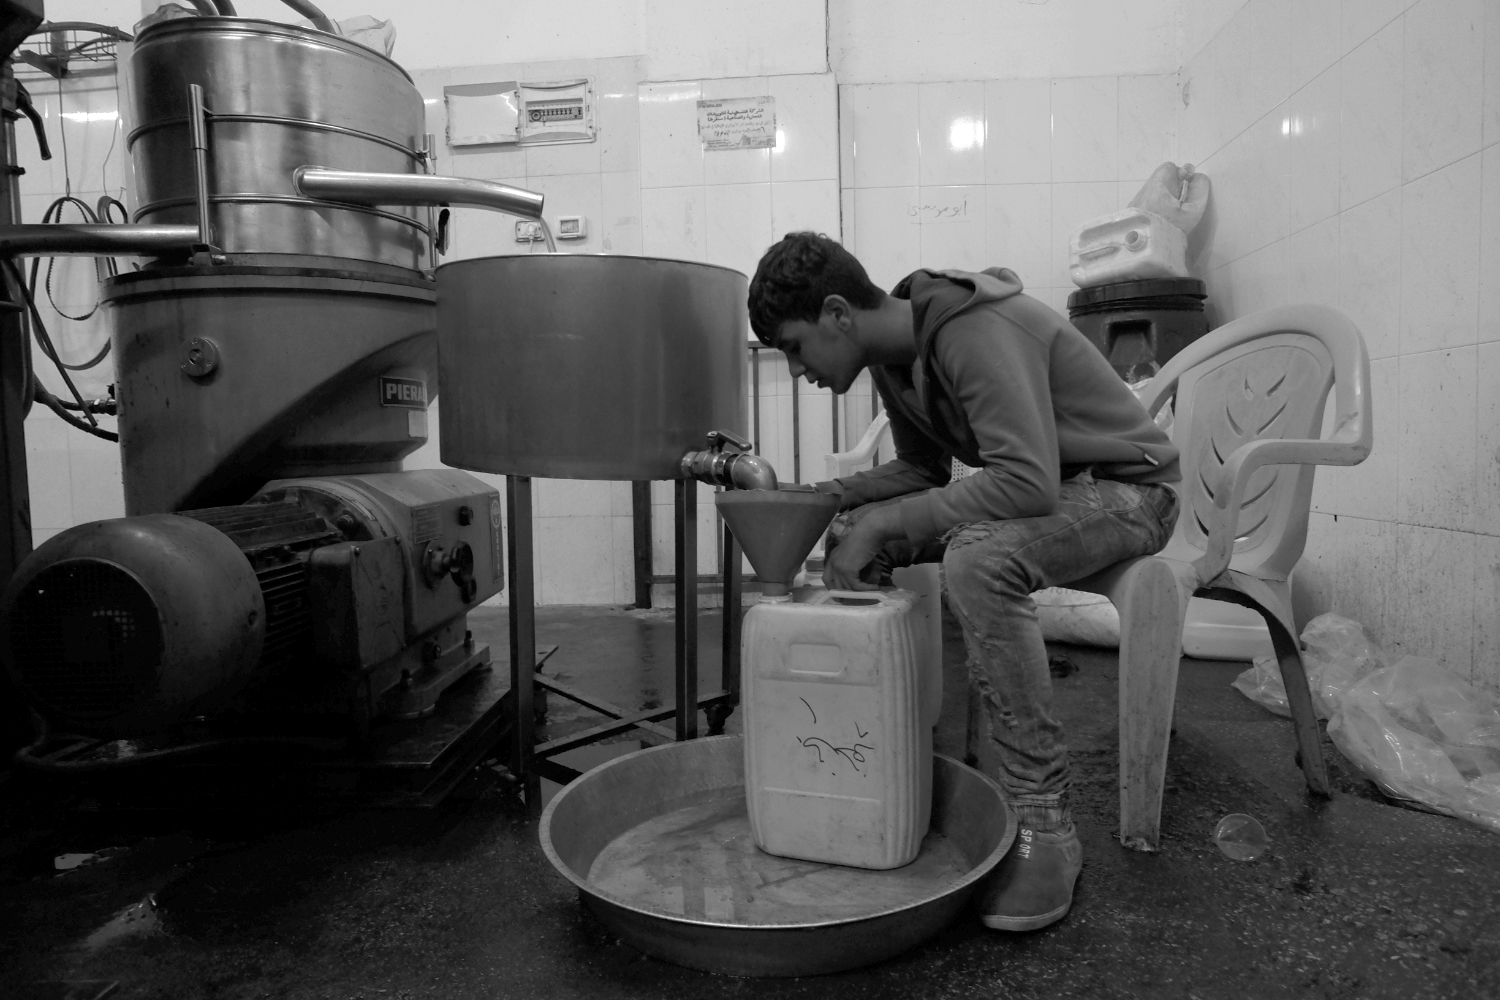  Hakam, Mr. Abdalhade's young worker, sits next to the press bottling today's harvest. 